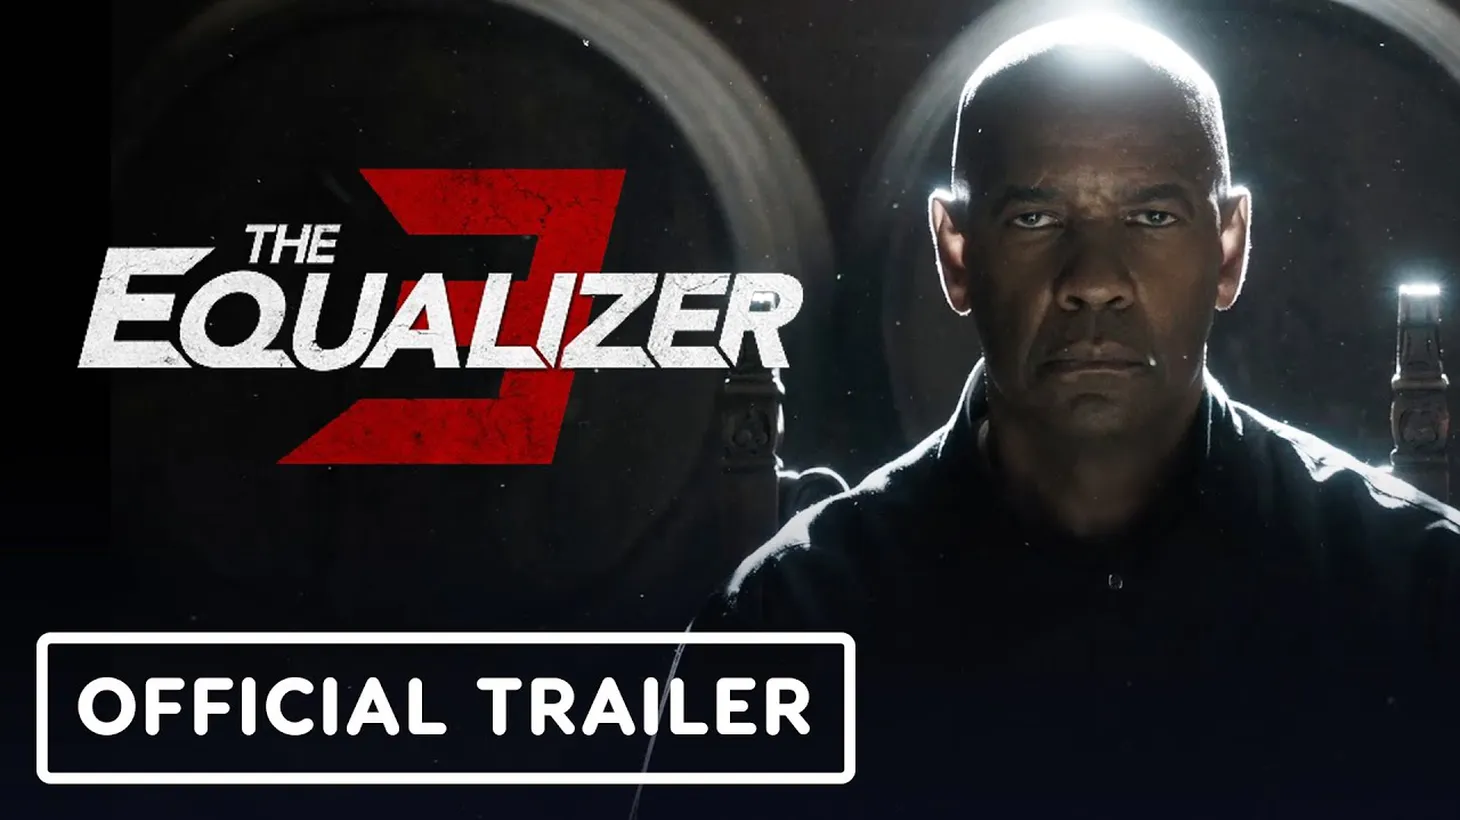 “I think if you just want to go for the Denzel [Washington] of it all, of him just having a good time with this character, I think it's worth it. It's pretty enjoyable,” says film critic Katie Walsh about “The Equalizer 3.”